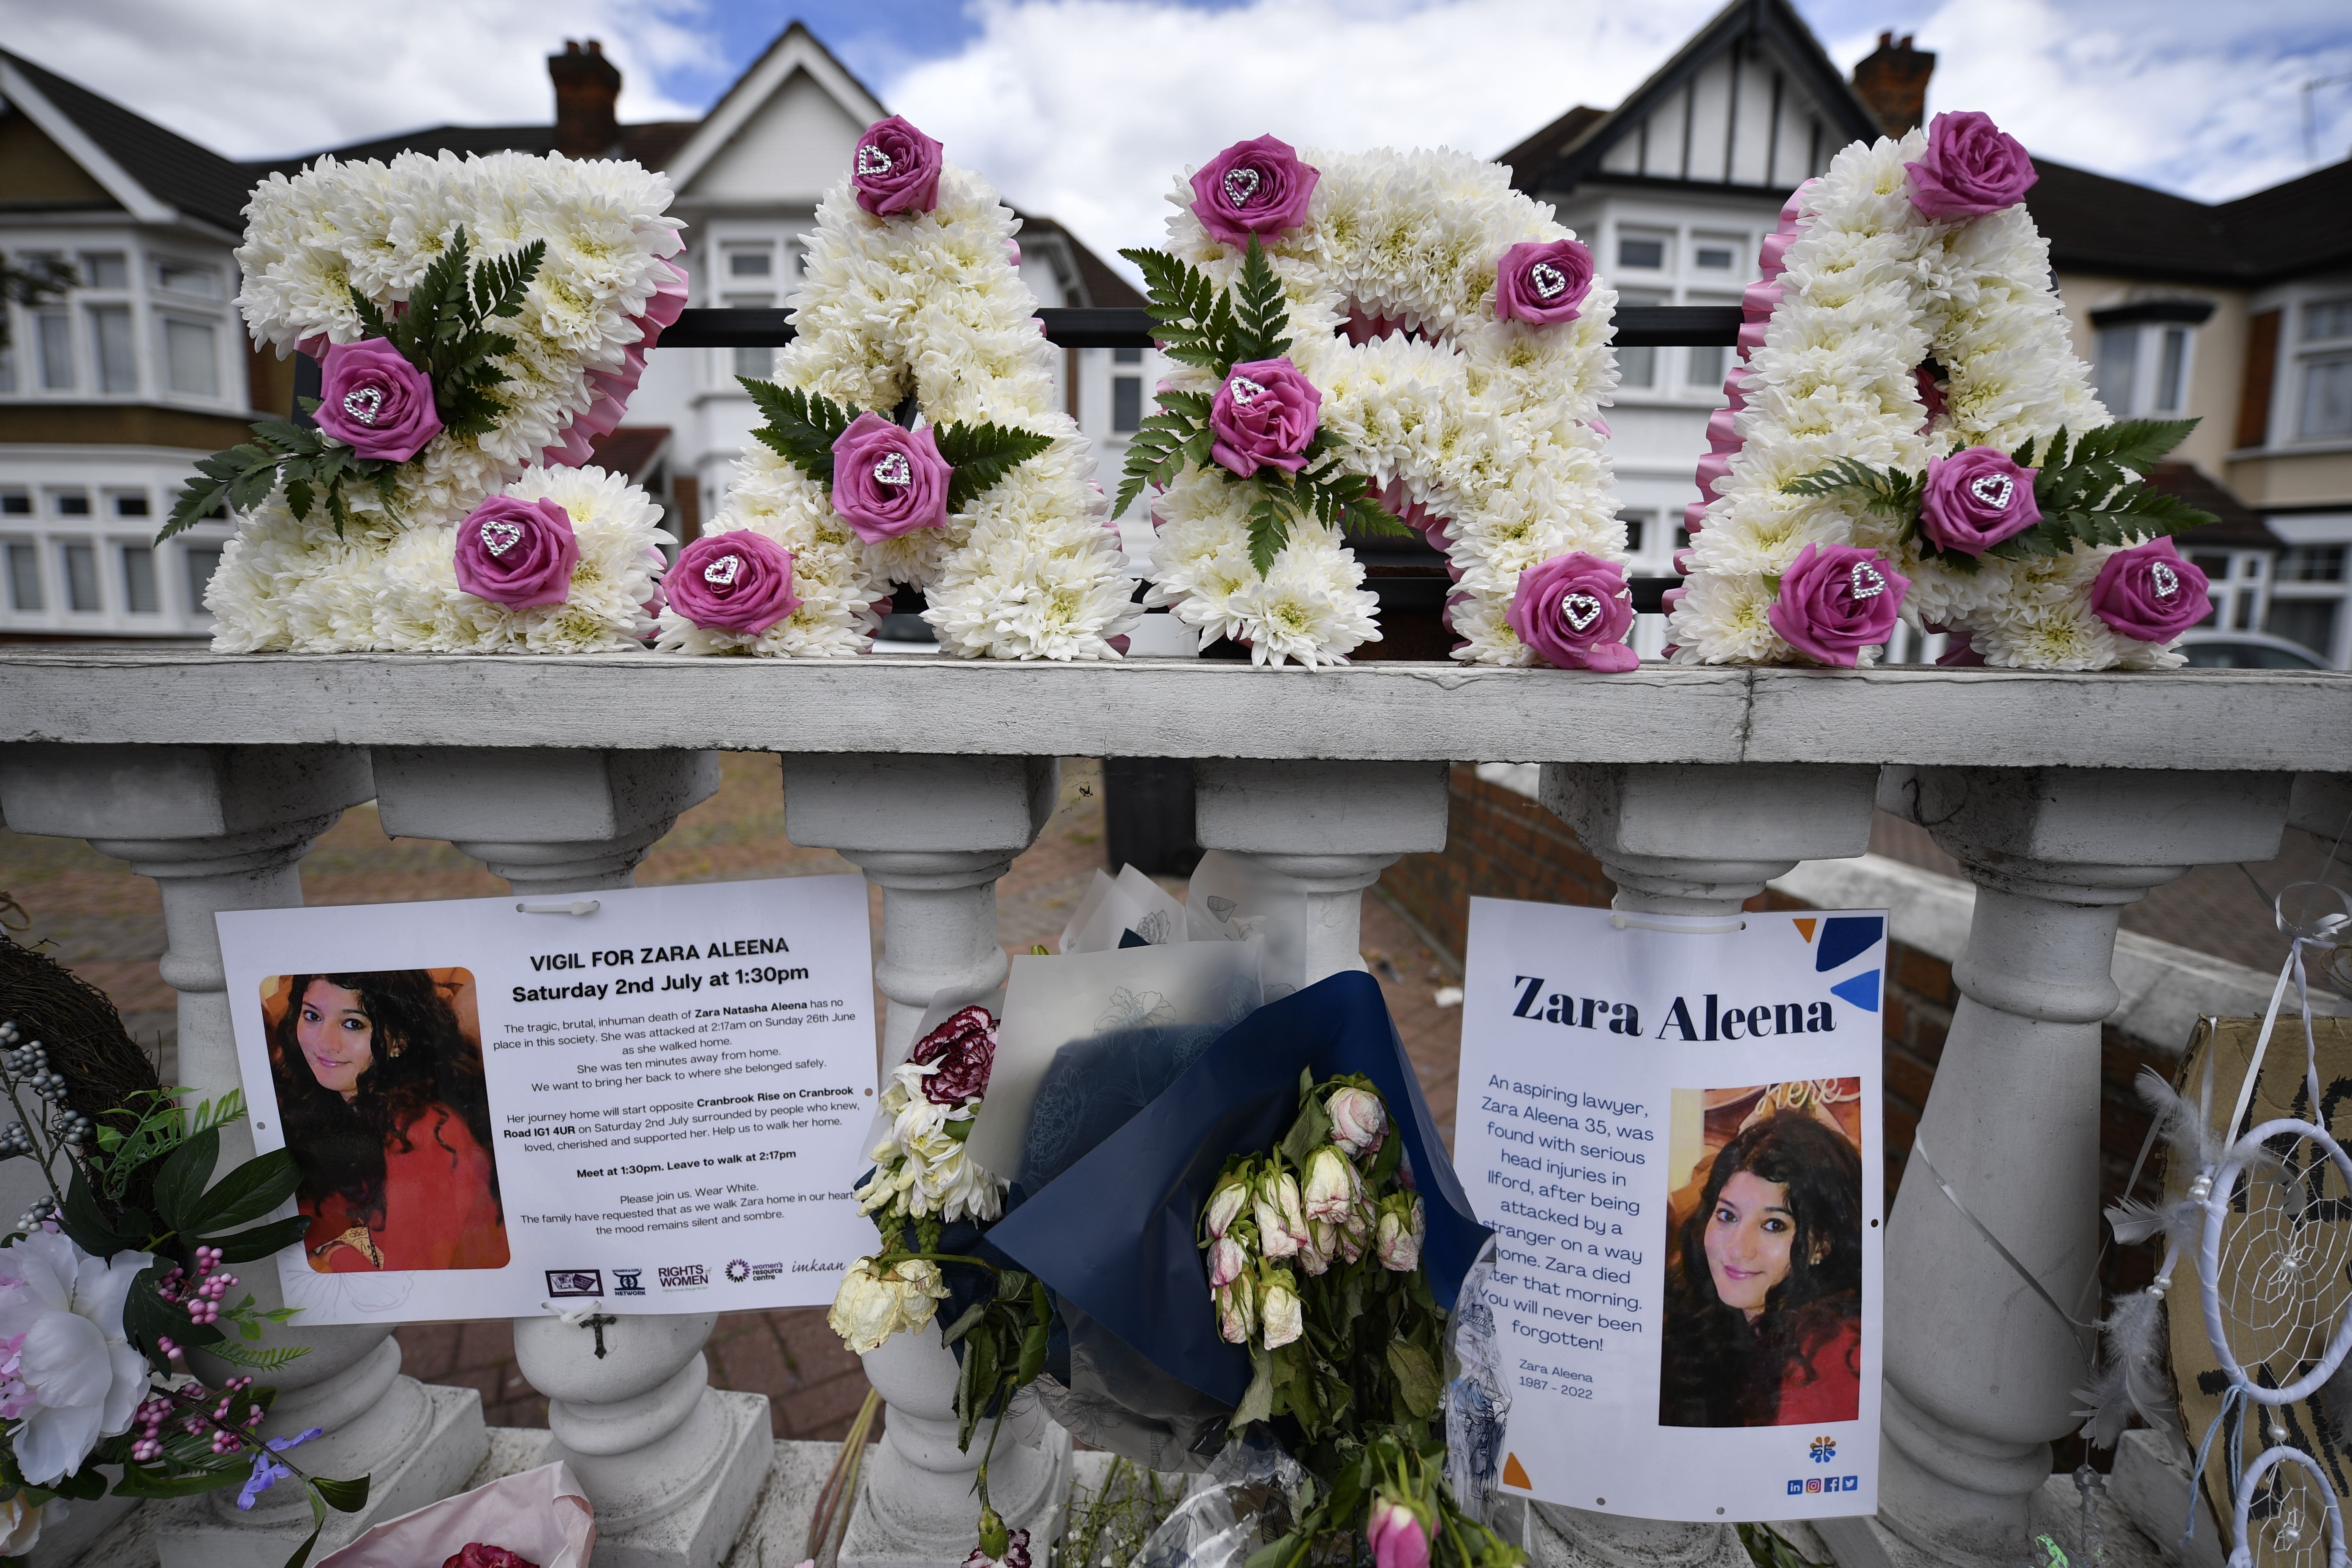 This year I named Zara Aleena, who was killed in public by a dangerous and violent man who was completely unknown to her